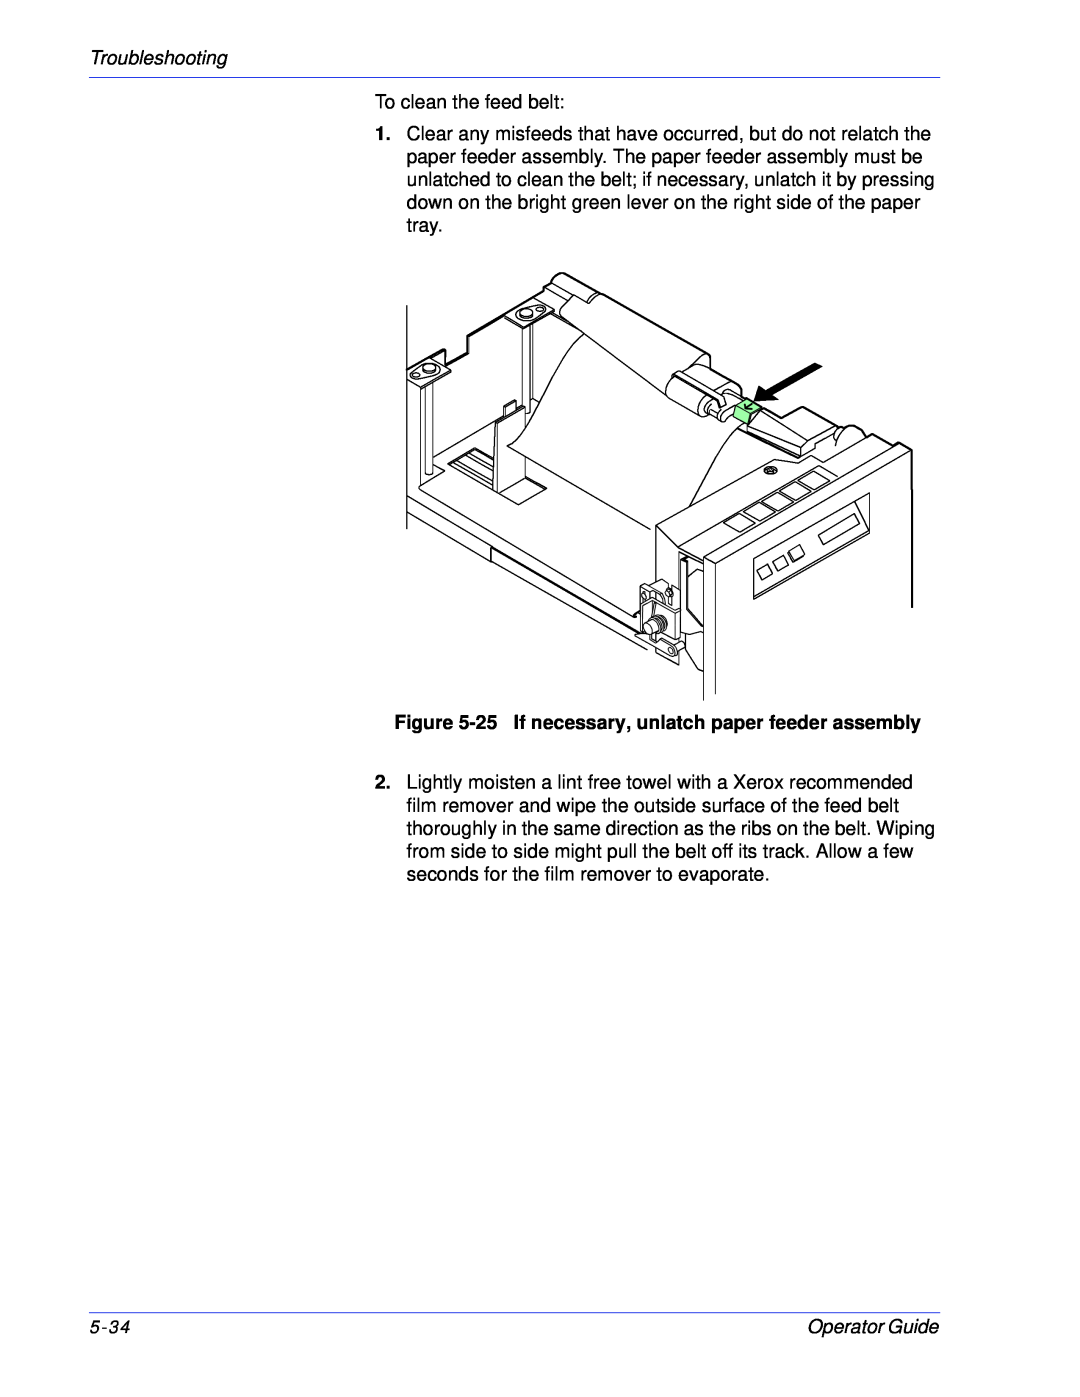 Xerox 100, 180 EPS manual Troubleshooting, To clean the feed belt 